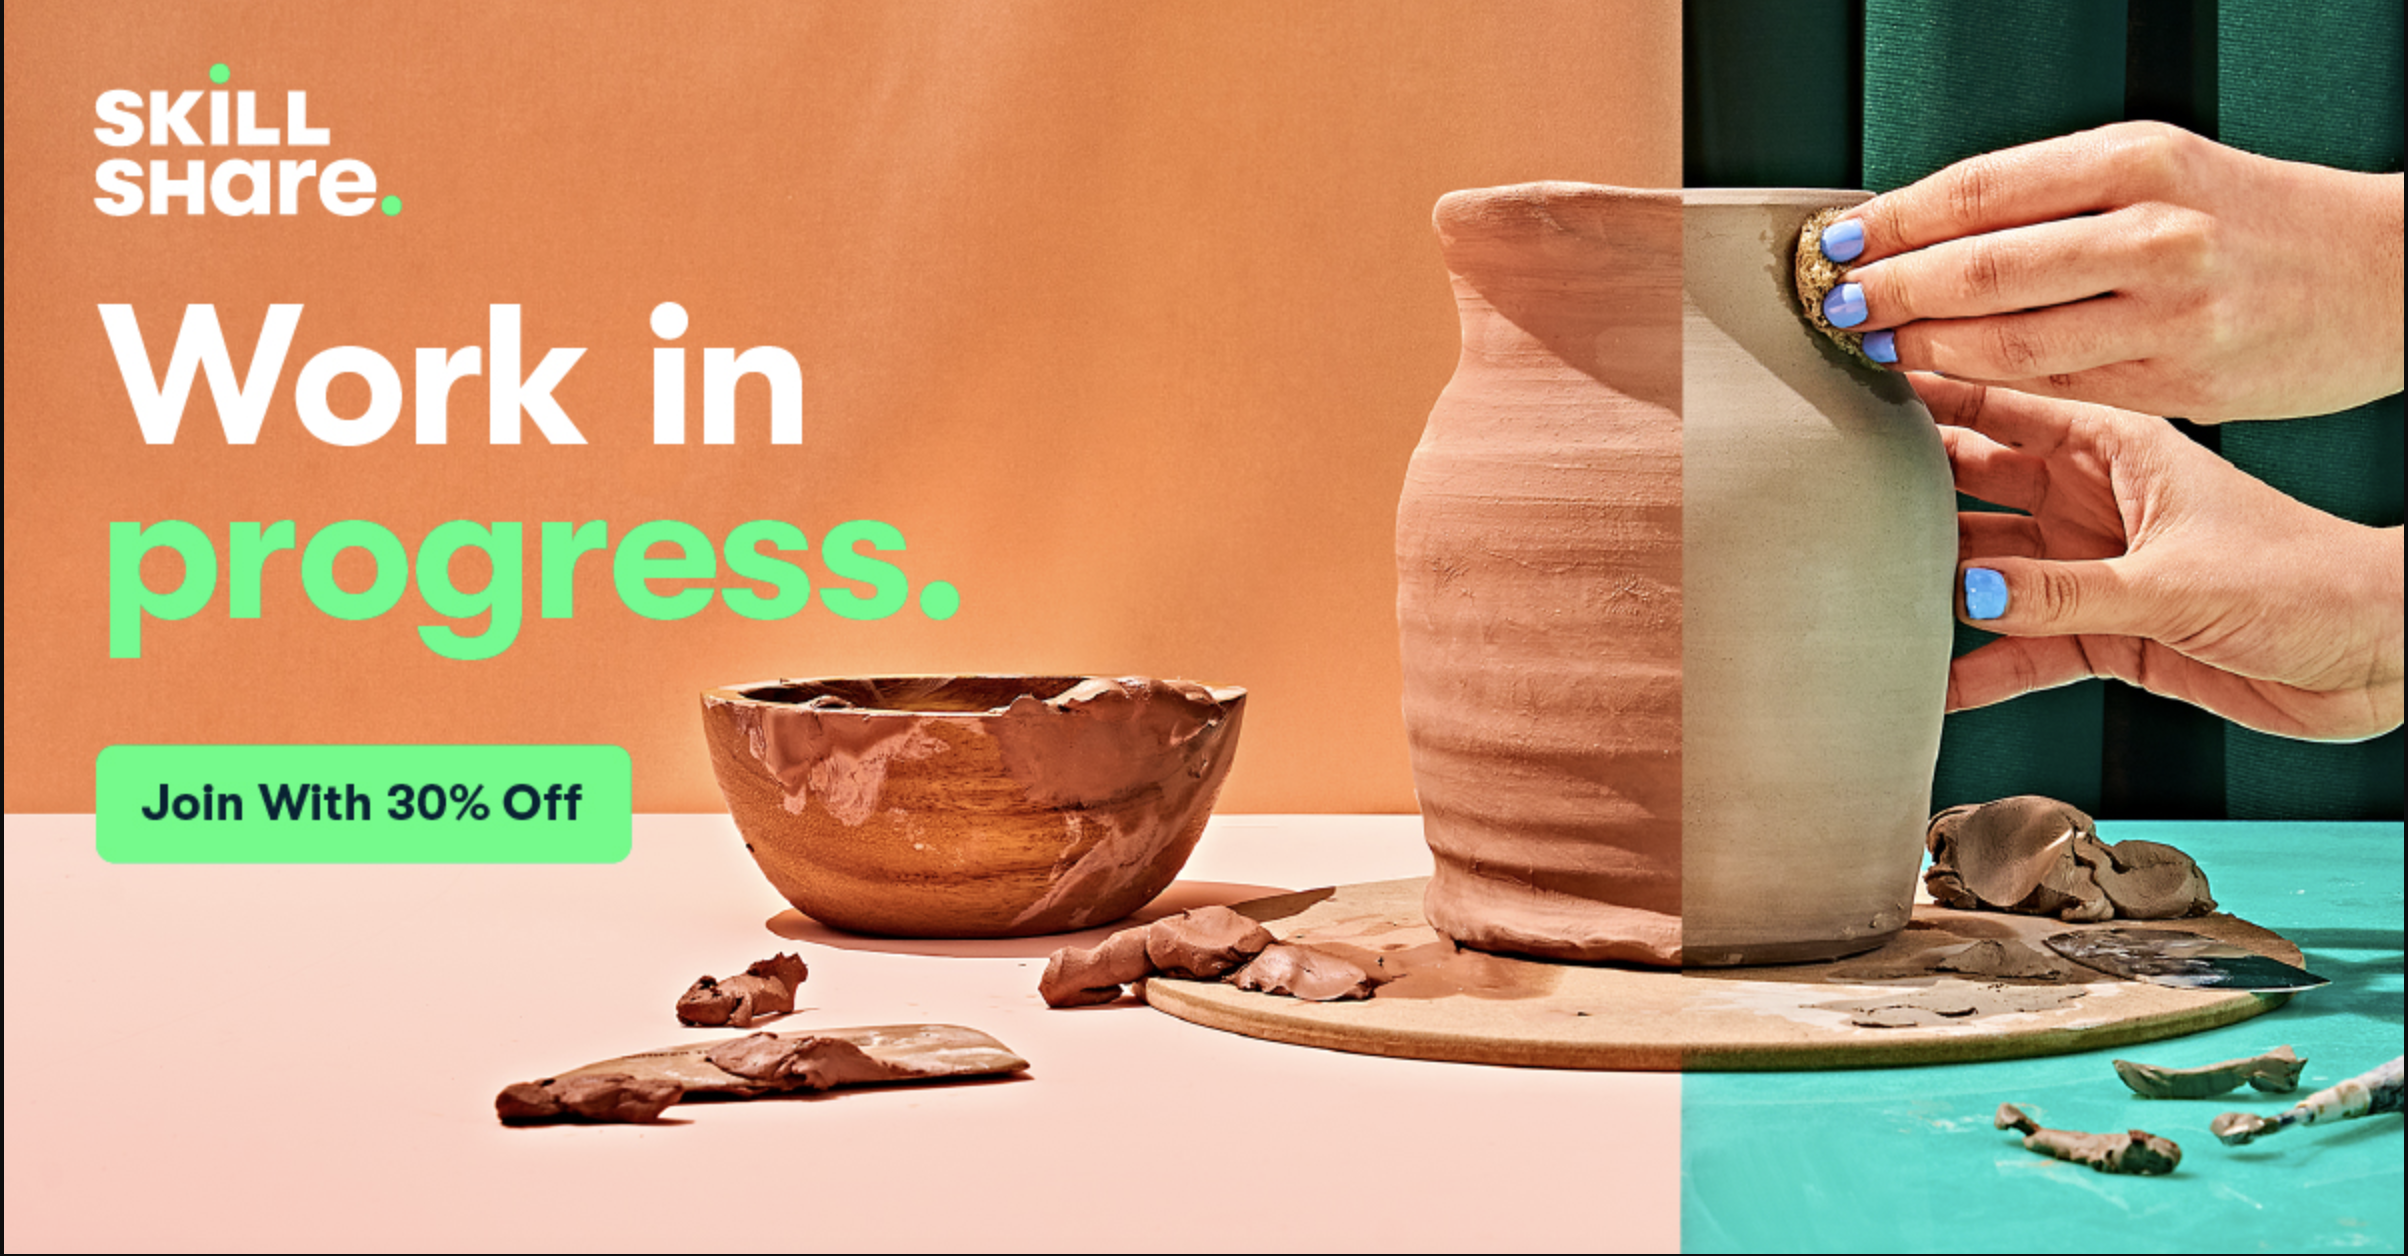 Skillshare promotional image featuring pottery making with the text Work in progress. Join With 30% Off.